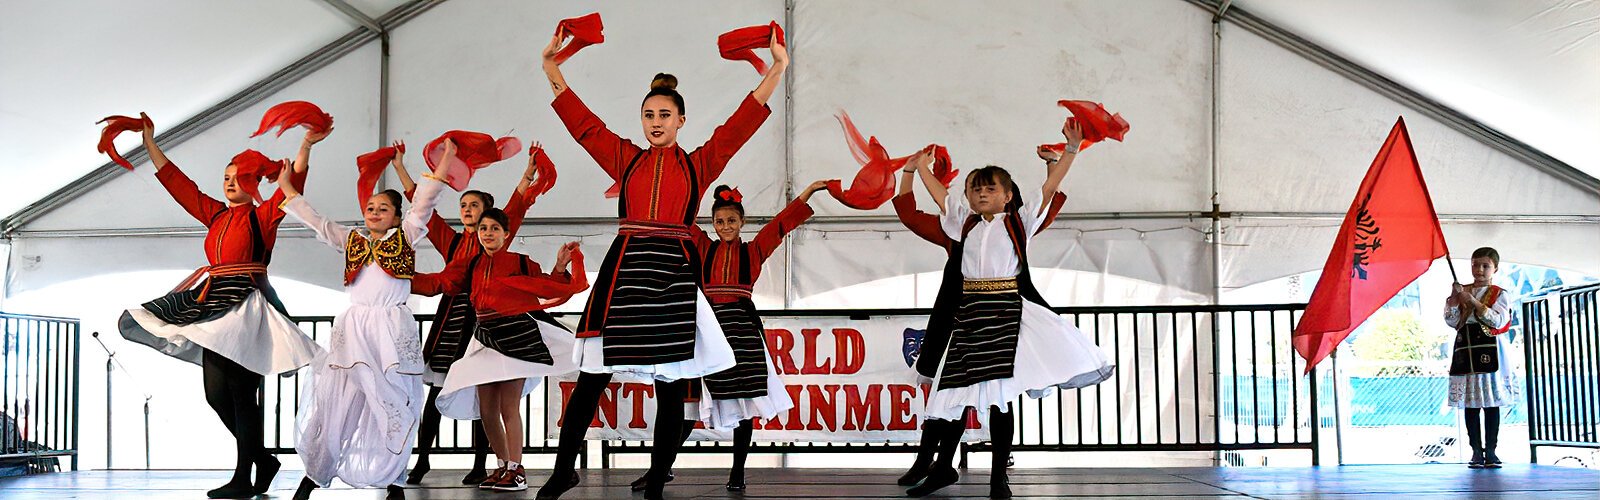 The Albanian culture is proudly represented on stage with one of their dances.